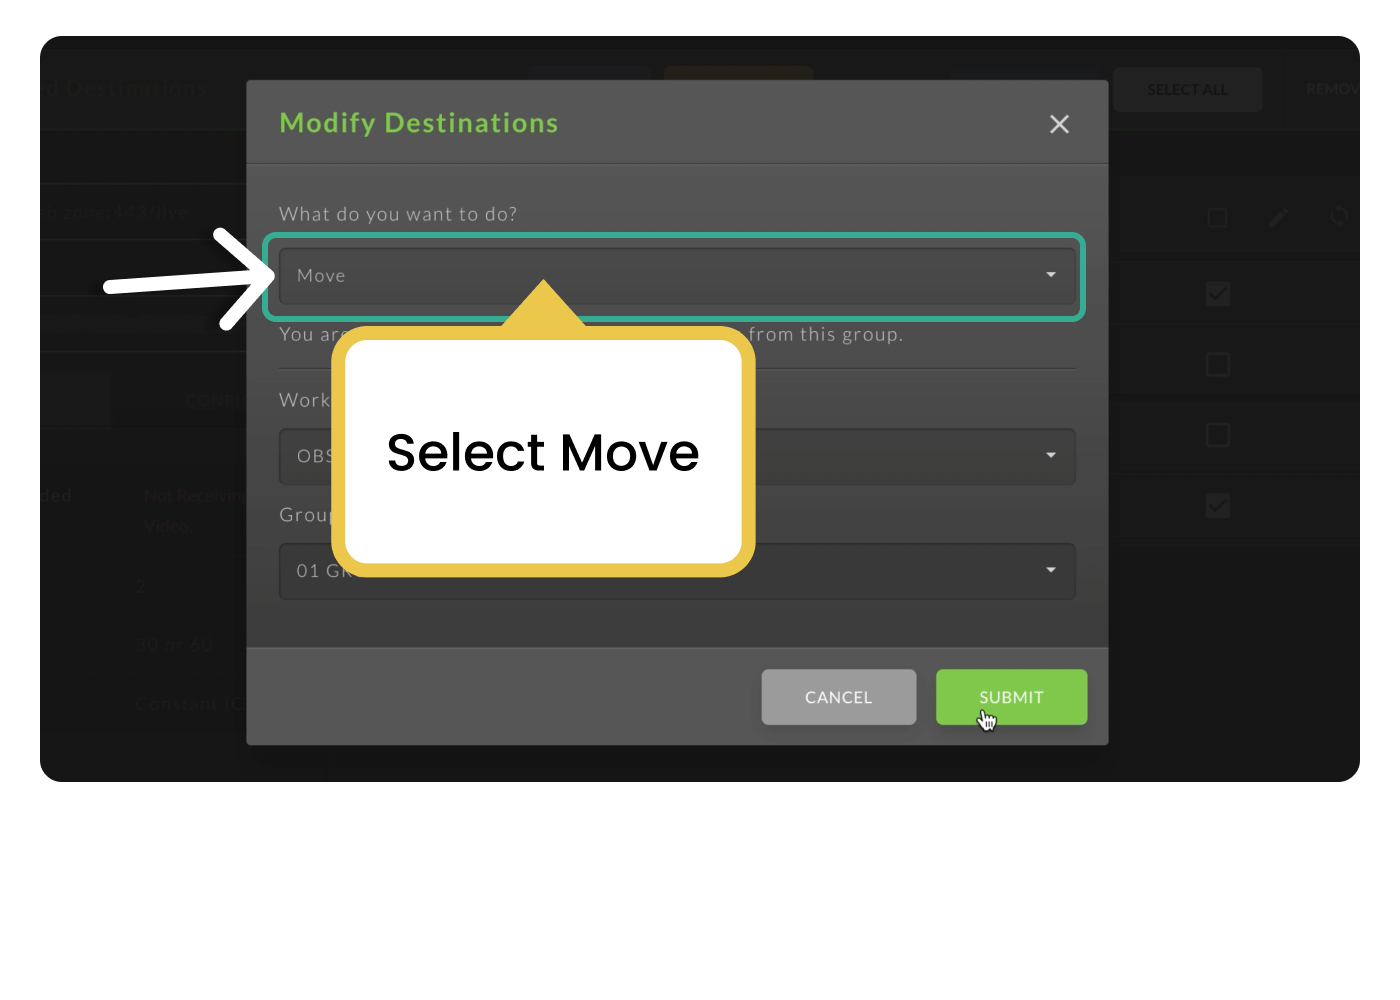 Movedestination-btwn-workflows-switchboardlive-howto 4.png